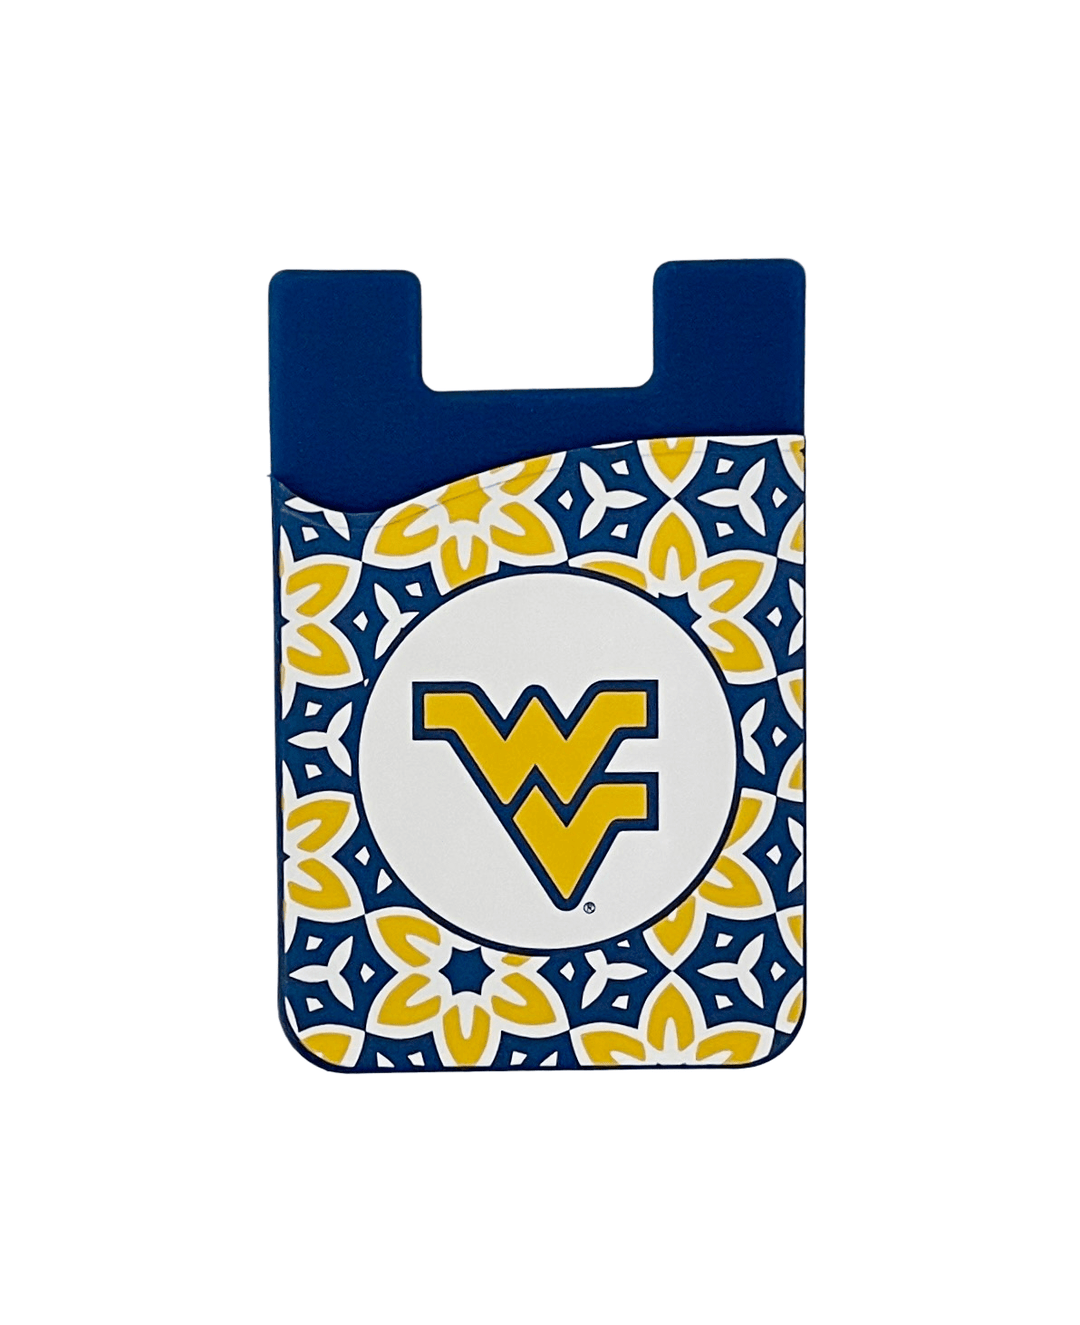 Desden Cell Phone Wallet Cell Phone Wallet - West Virginia University